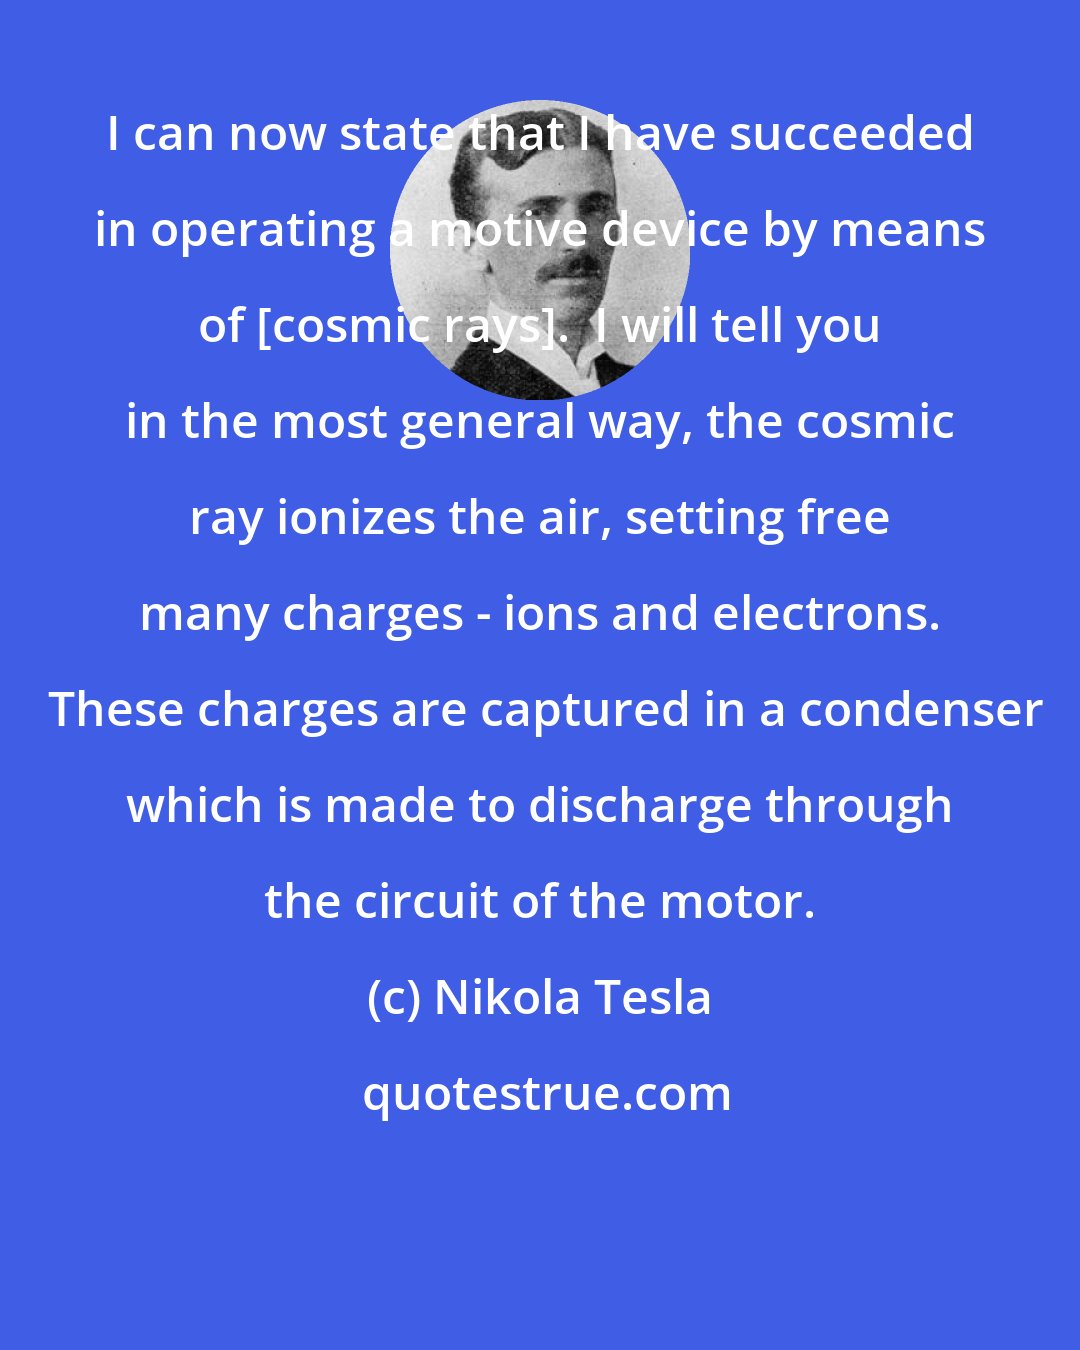 Nikola Tesla: I can now state that I have succeeded in operating a motive device by means of [cosmic rays].  I will tell you in the most general way, the cosmic ray ionizes the air, setting free many charges - ions and electrons.  These charges are captured in a condenser which is made to discharge through the circuit of the motor.